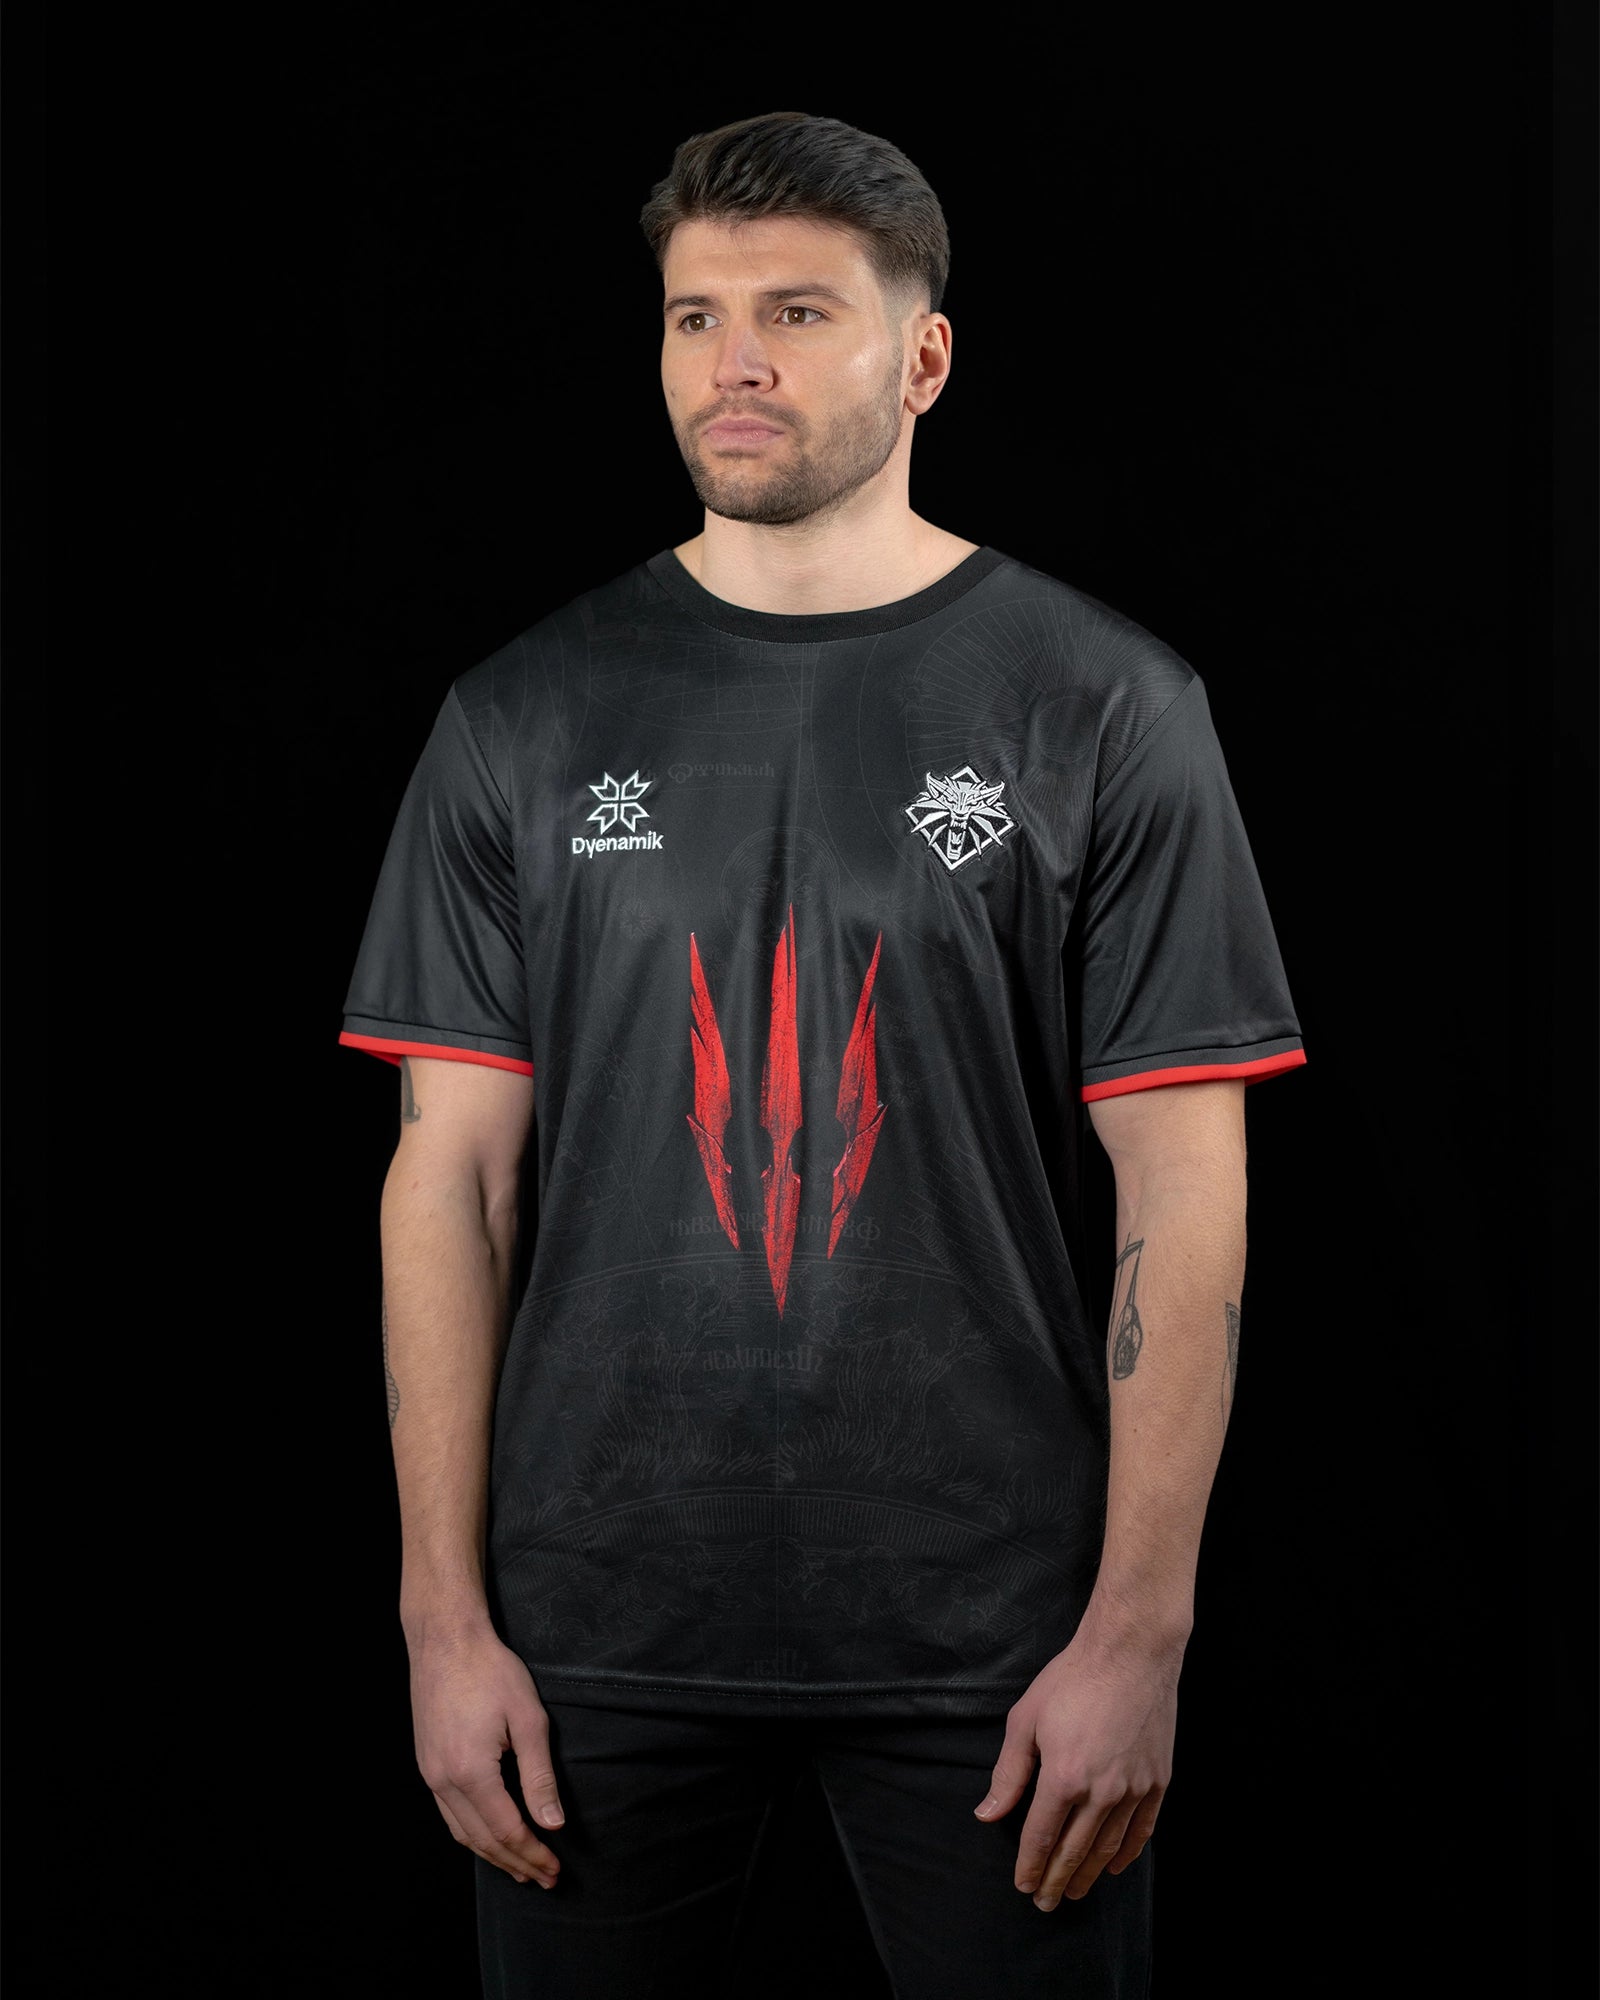 The Witcher Team Jersey Collection